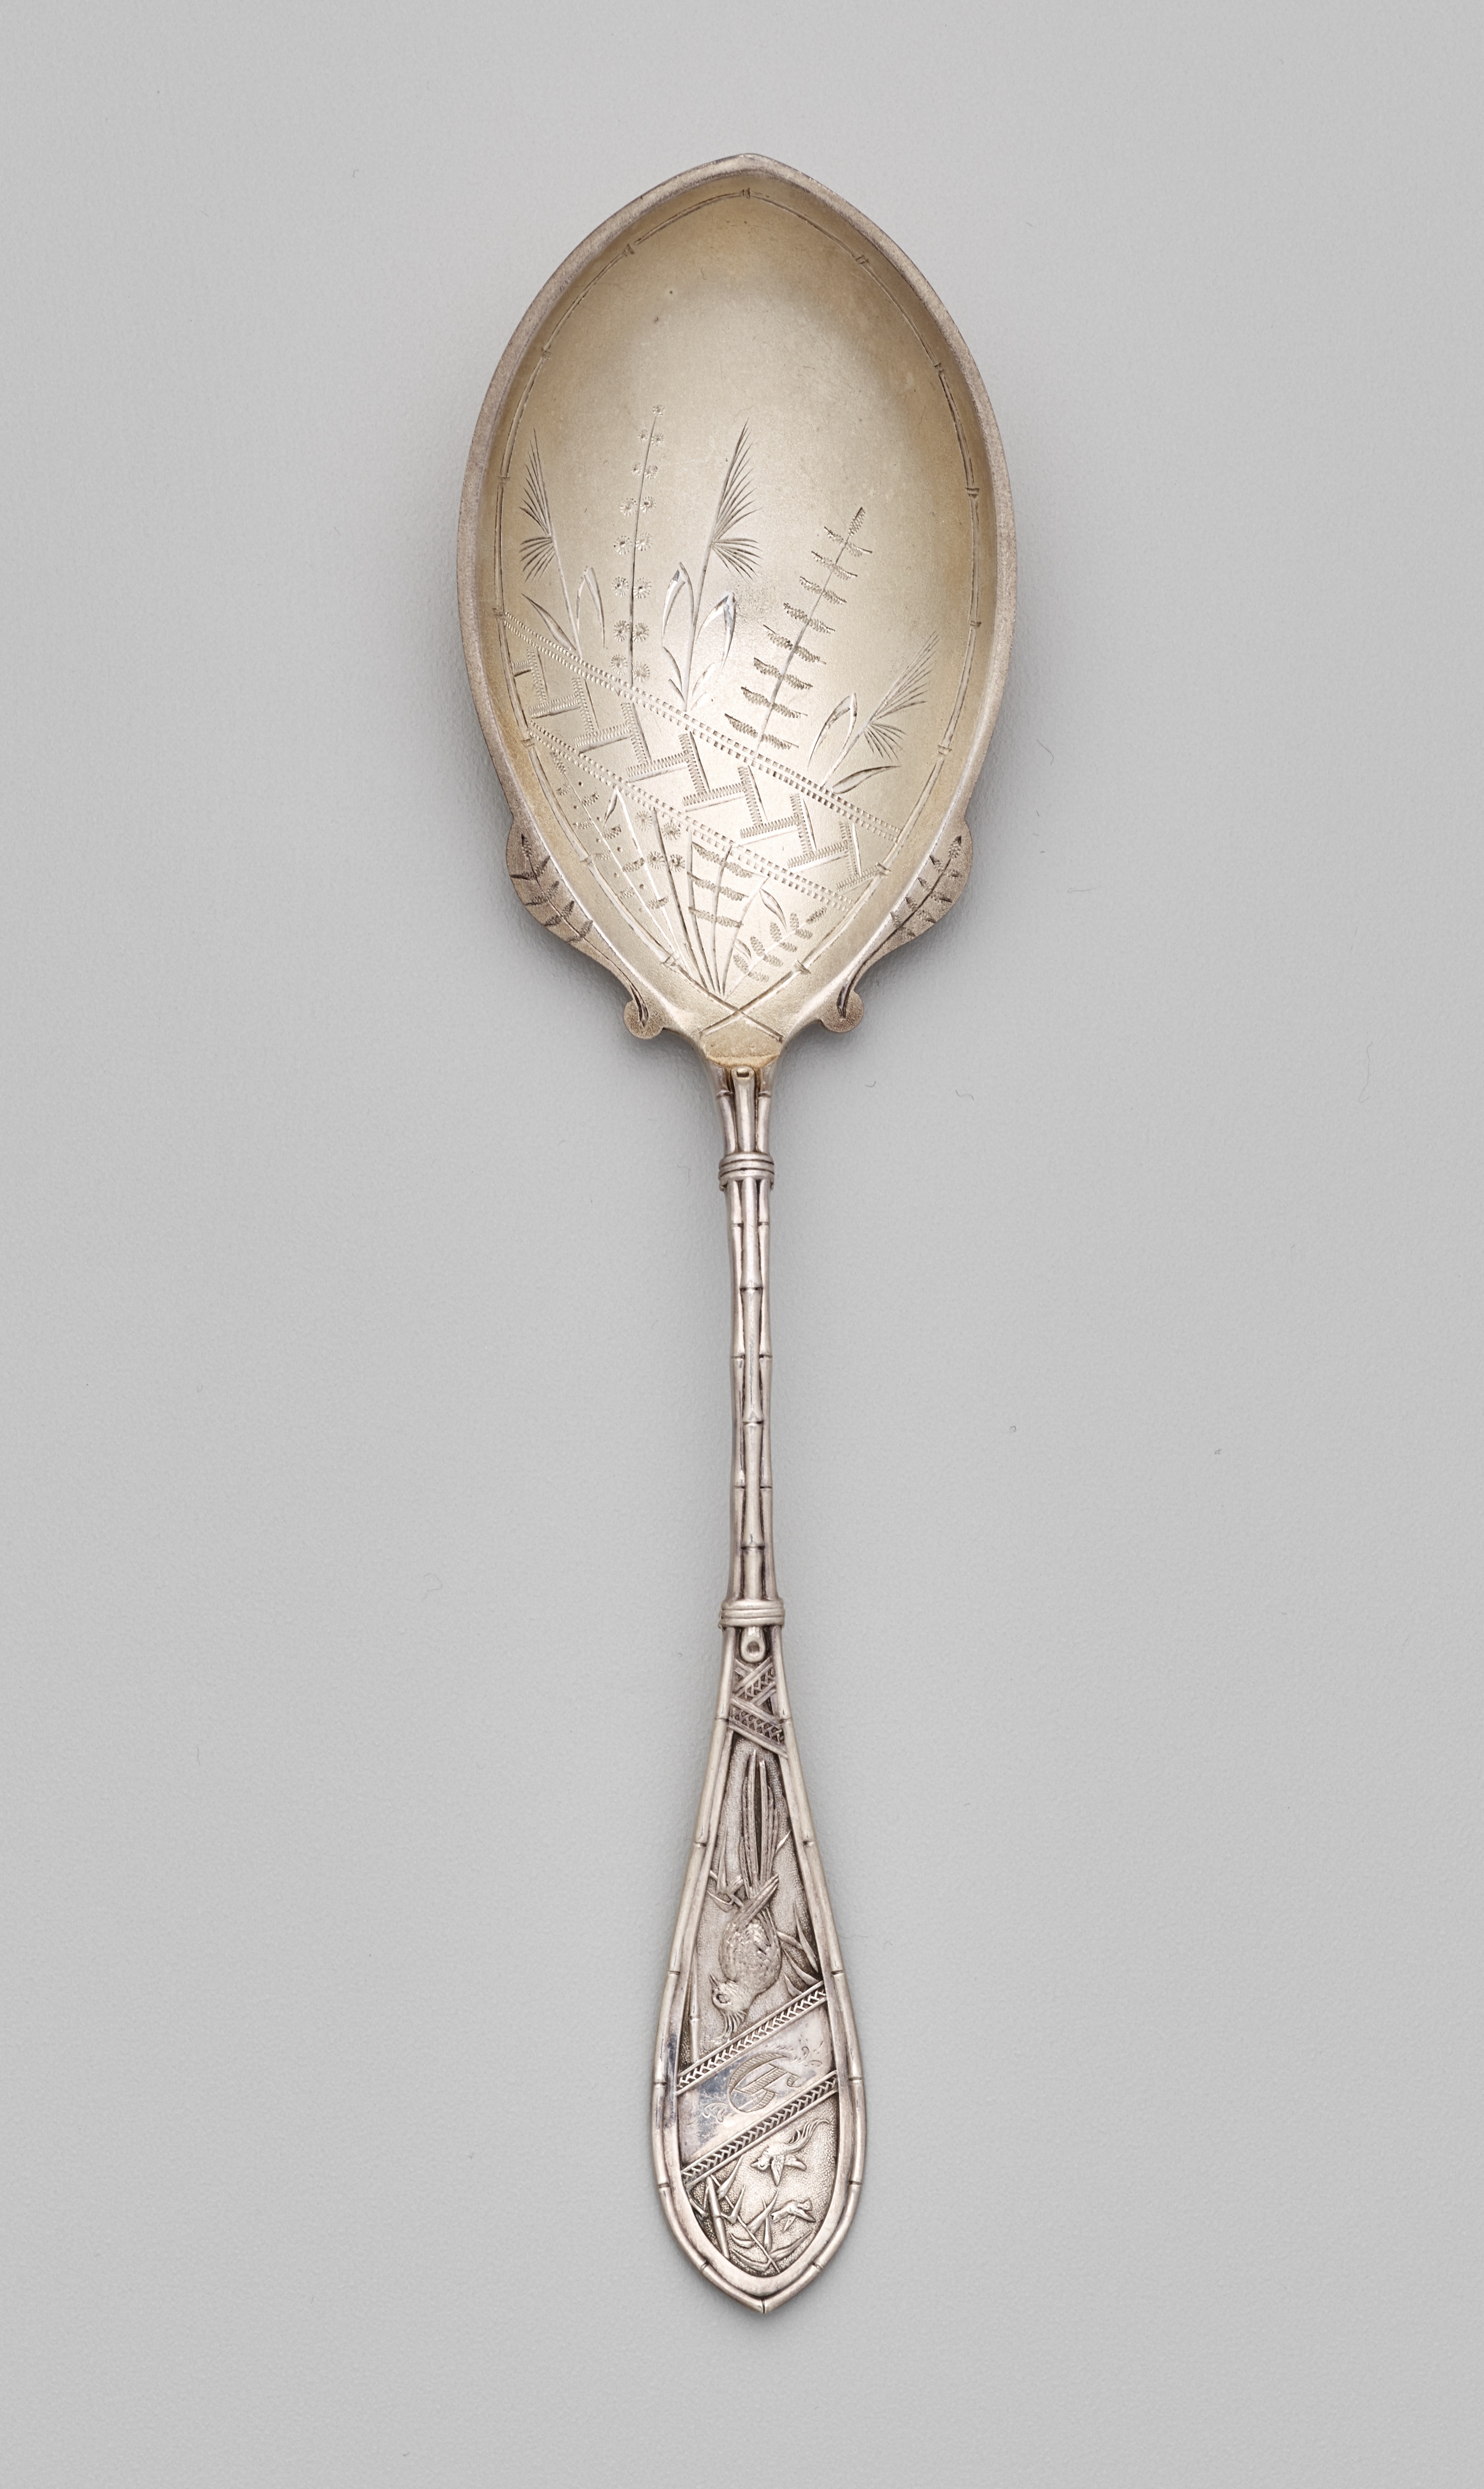 File:Silver Serving Spoon Whiting Manufacturing Co.jpg - Wikipedia